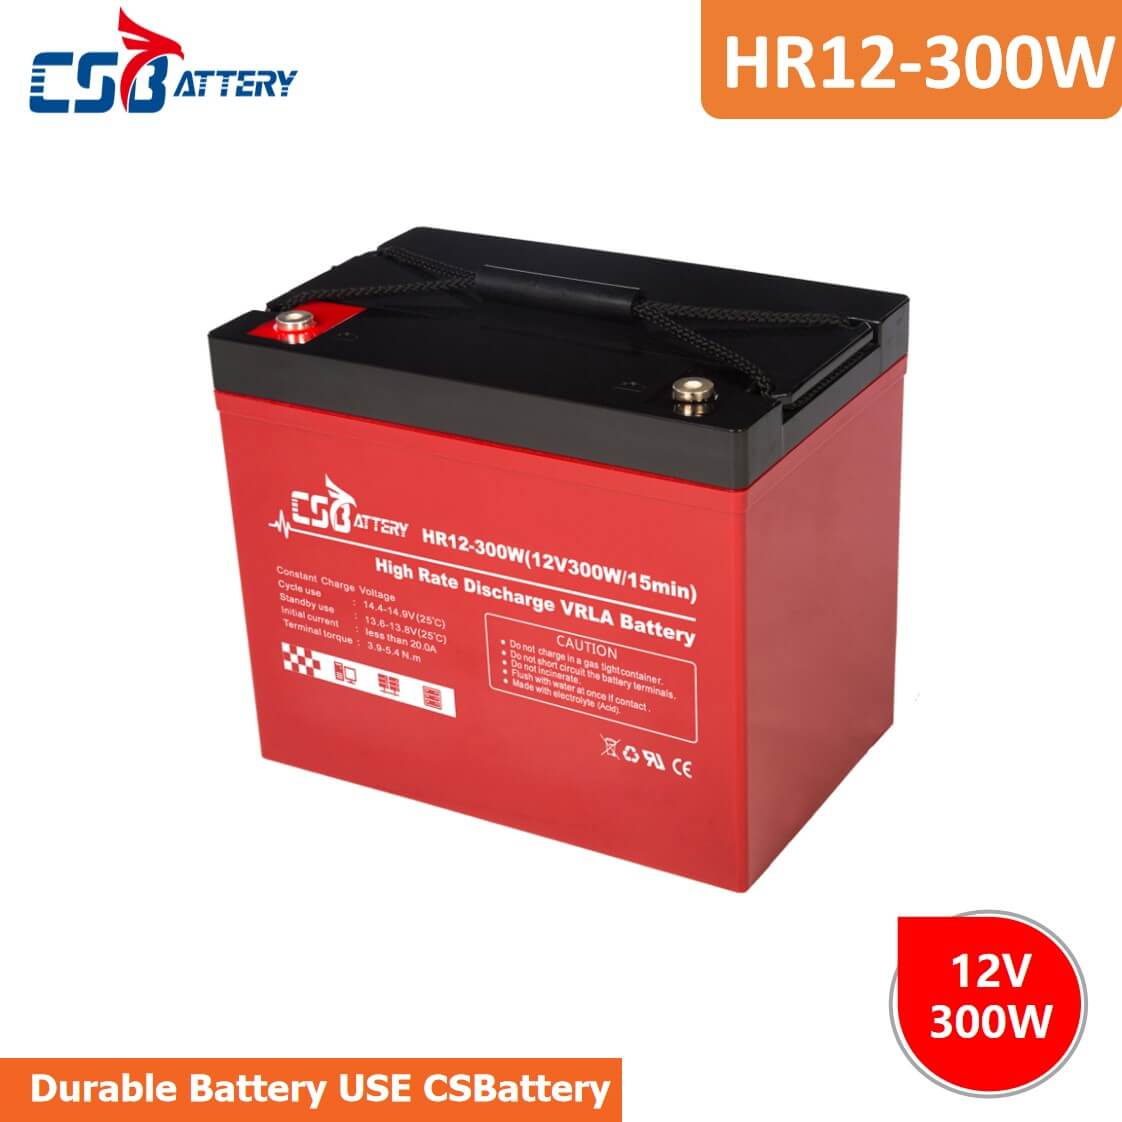 HR12-300W High Discharge Rate Battery